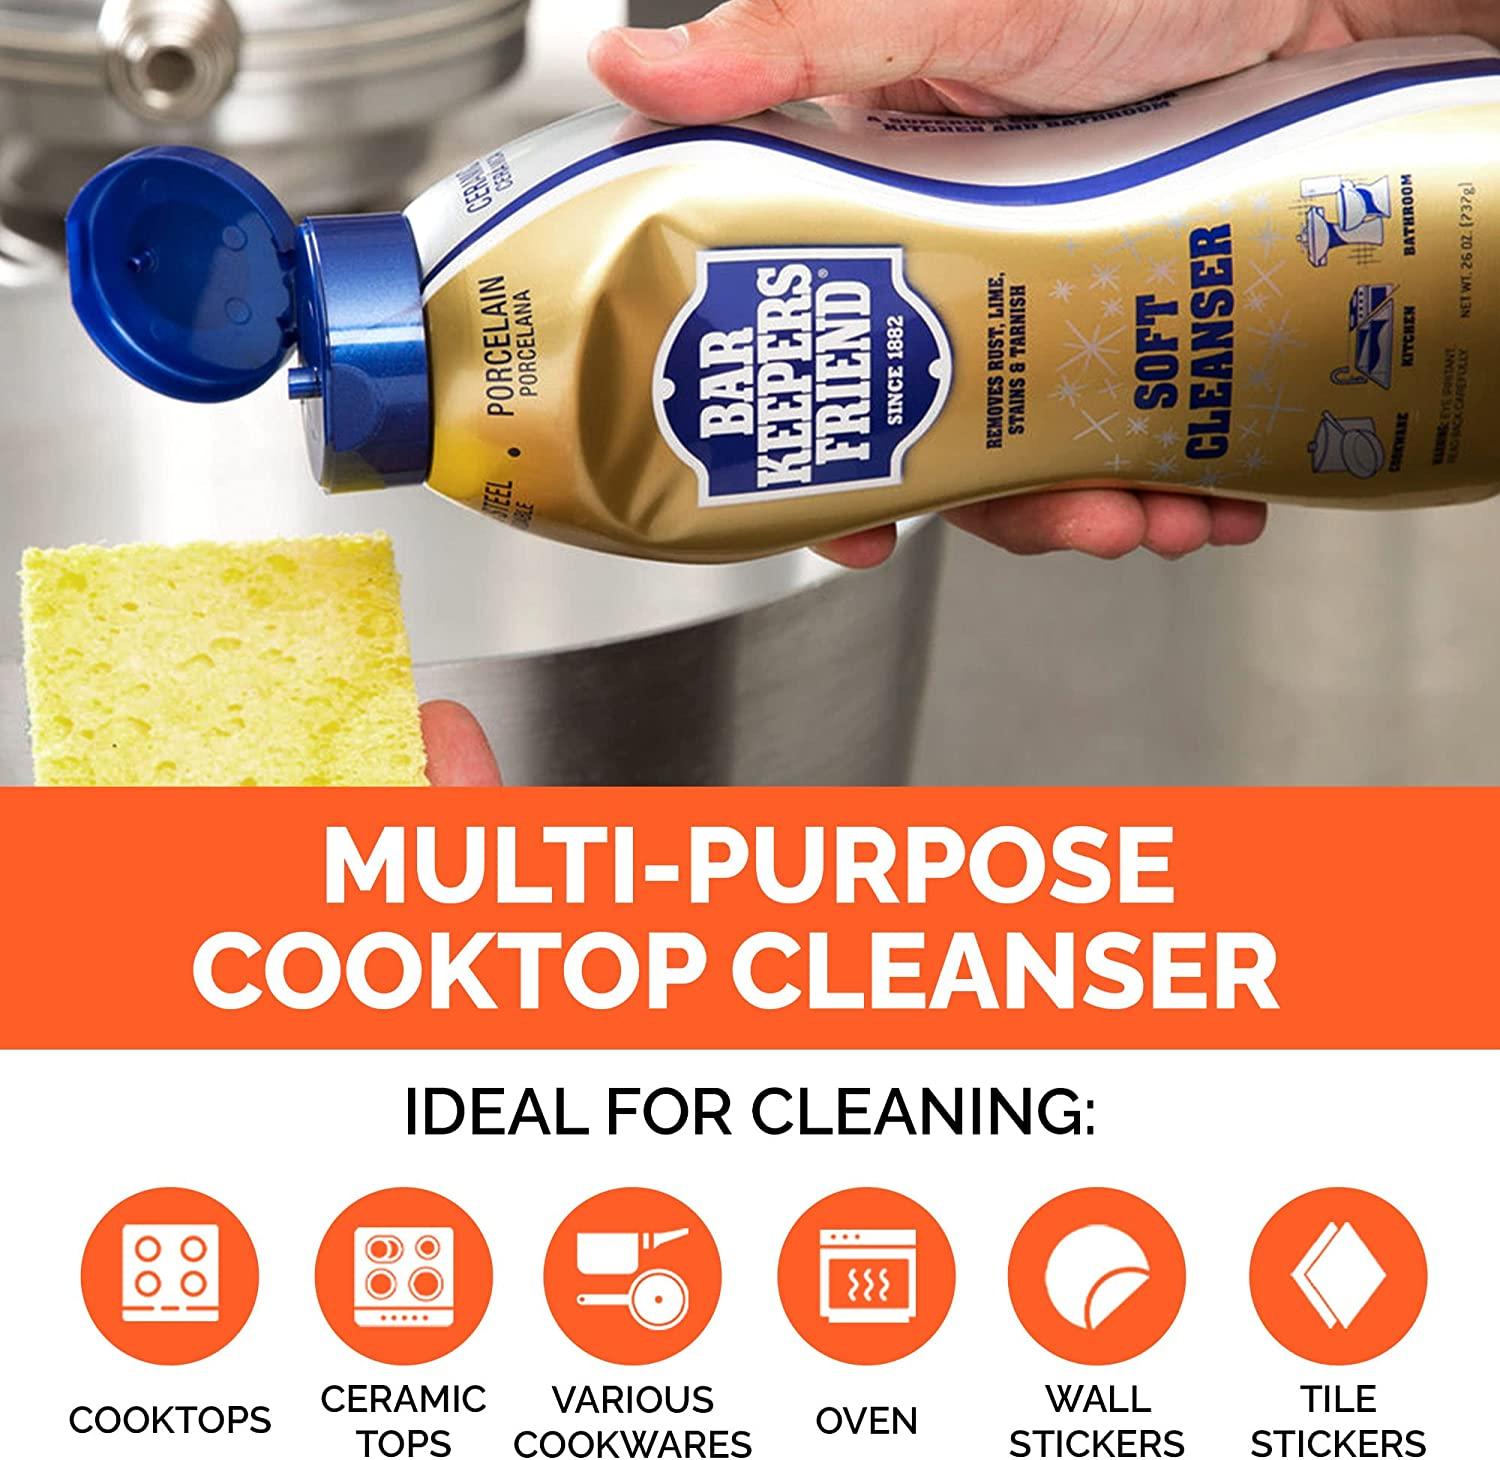 Bar Keepers Friend Soft Cleaner